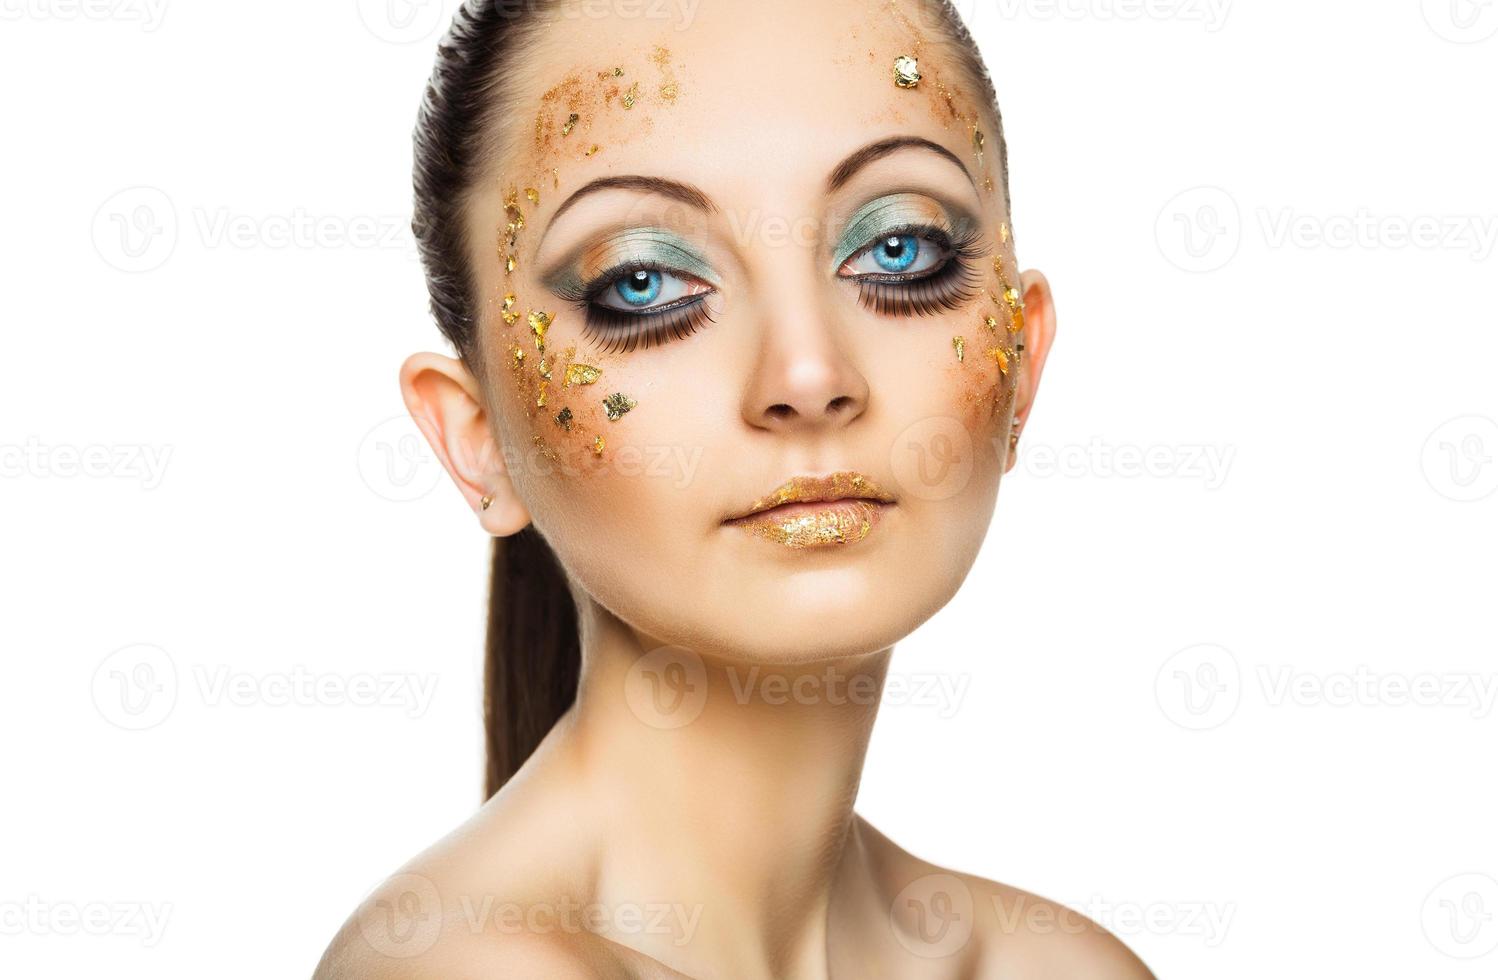 A beautiful young woman with golden face paint and glitter